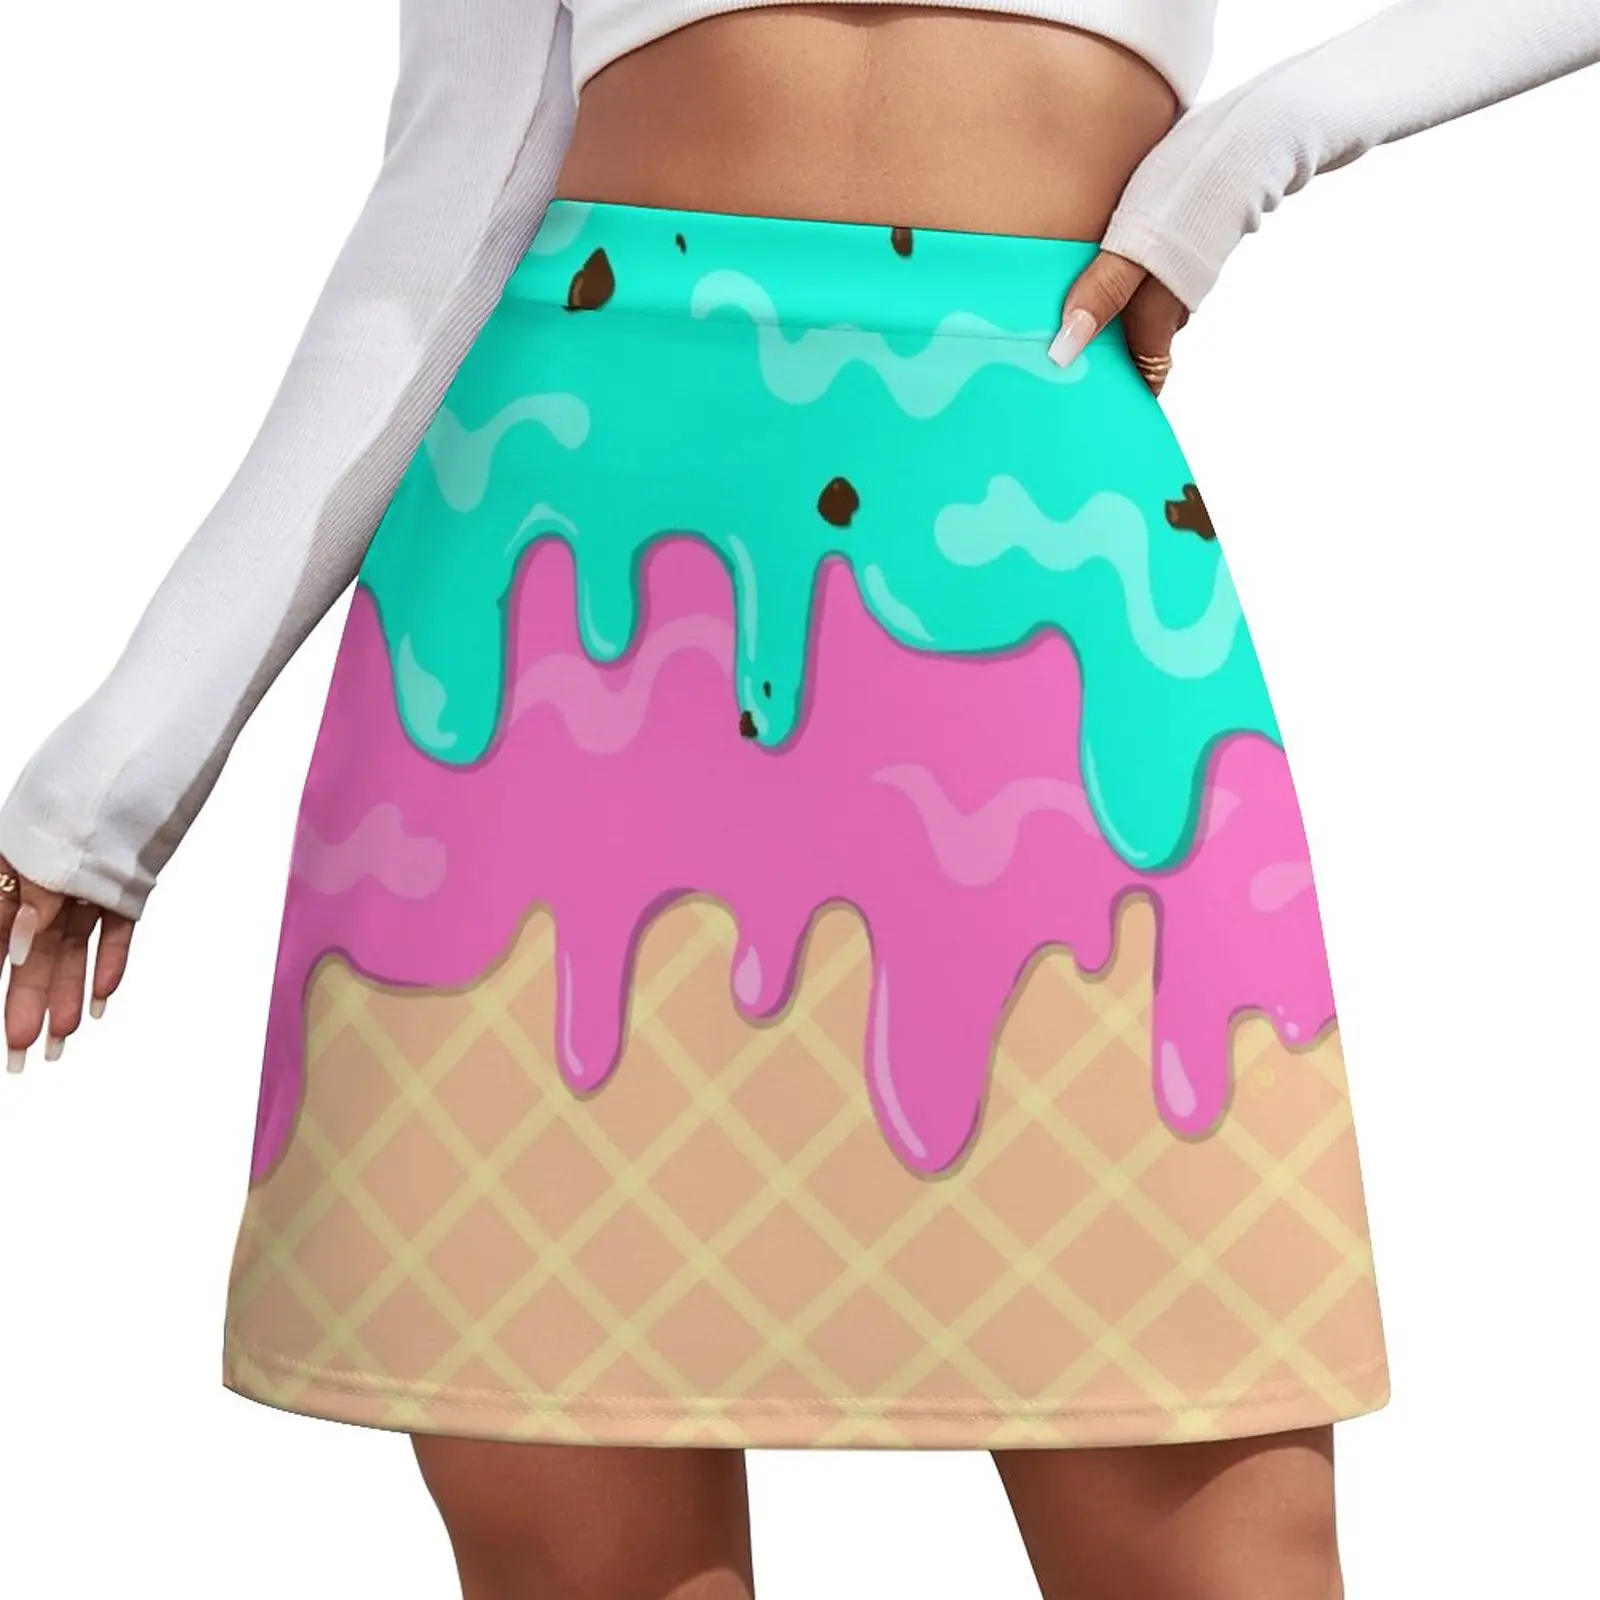 Melting Ice Cream in a Cone with mint chocolate and strawberry Ice Cream Mini Skirt skirts Dresses ice cream cone игрушка для собак